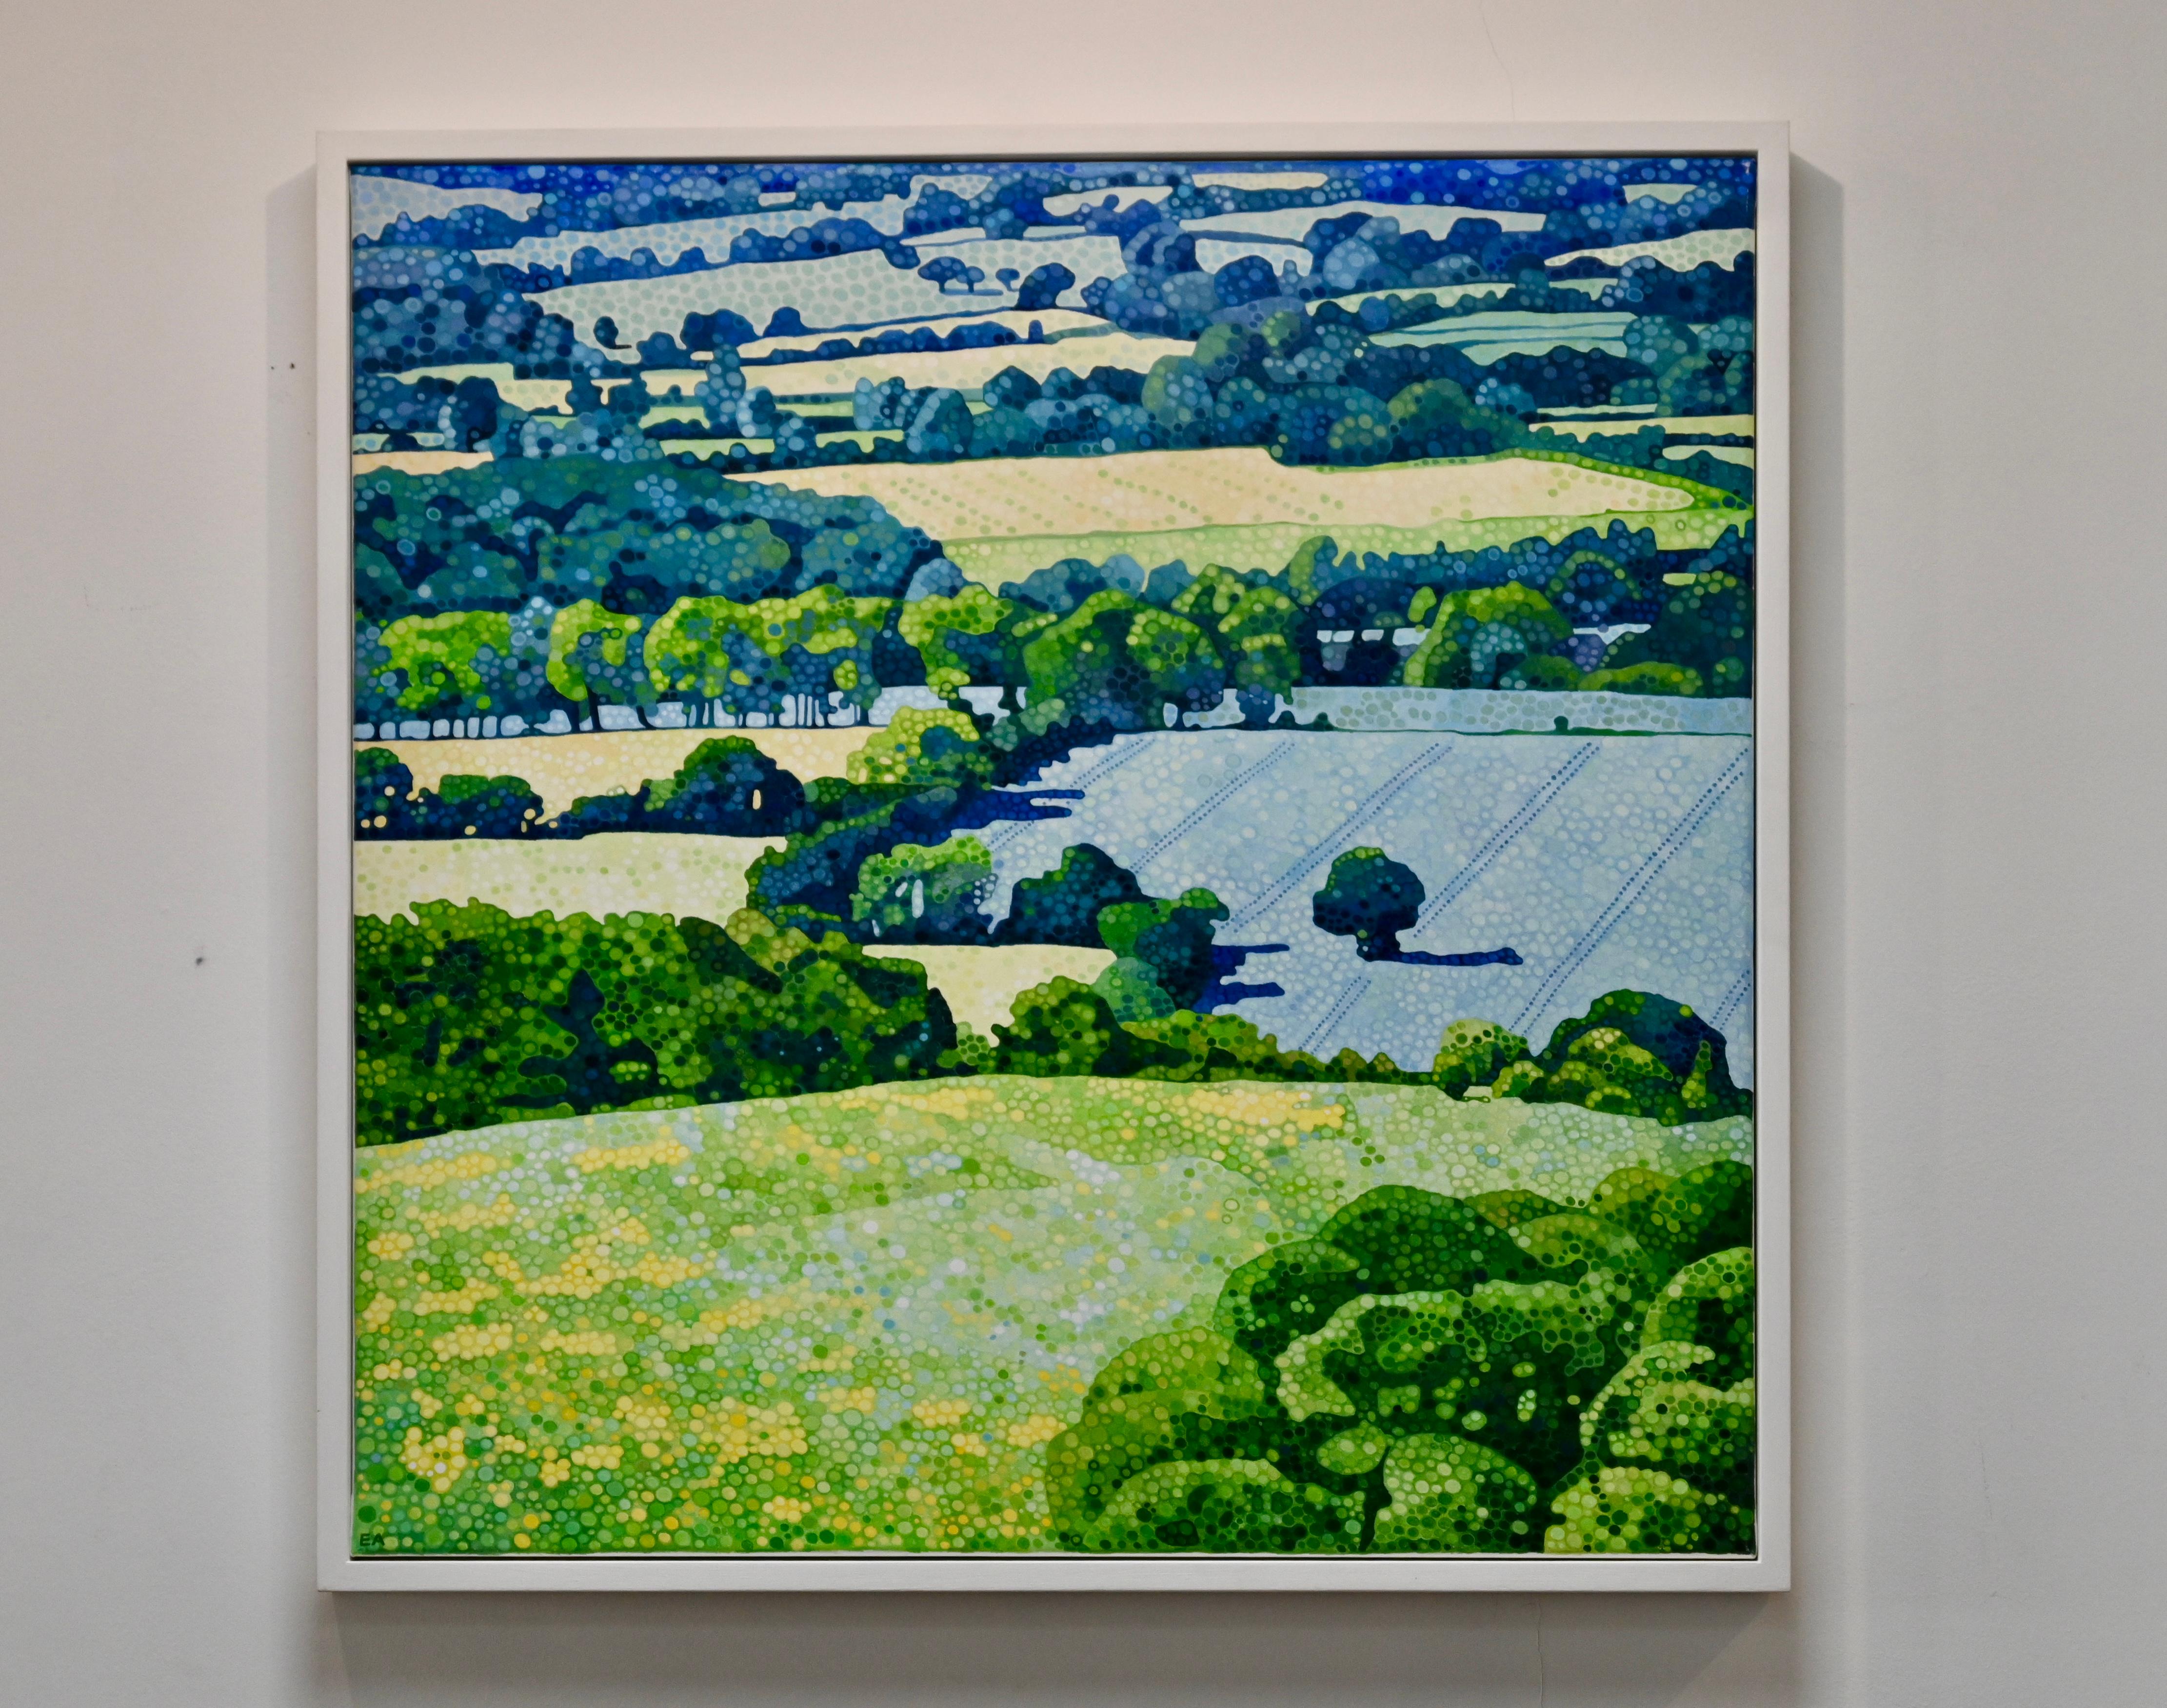 Ewa Adams is a landscape painter. Her painting is a contemporary take on Pointillism. She builds her images out of circles of pure colour juxtaposted next to one another. It is a slow, repetitive and meditation-like process. The result is a